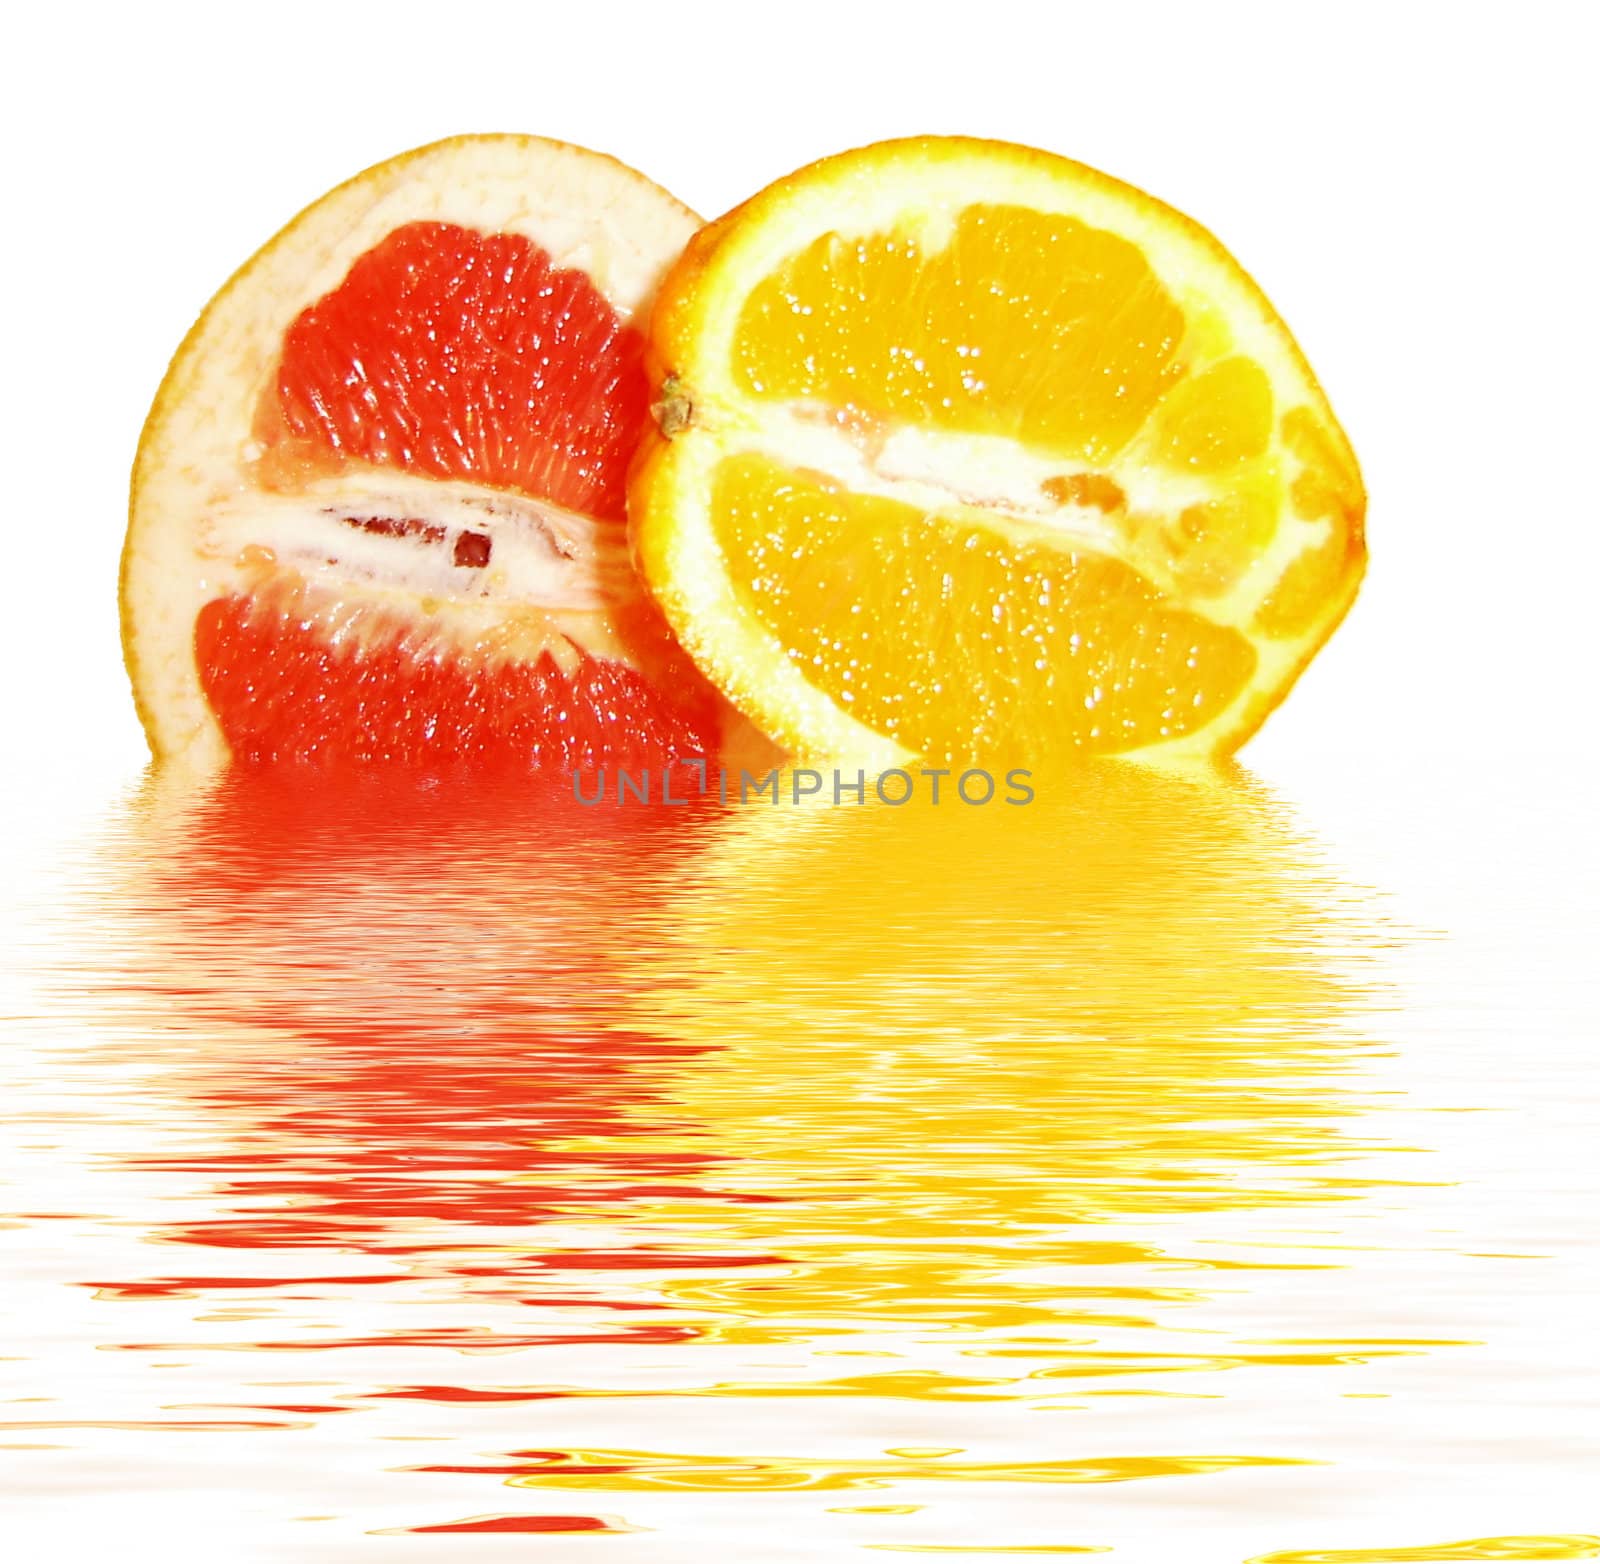 slices of orange and grapefruit in water